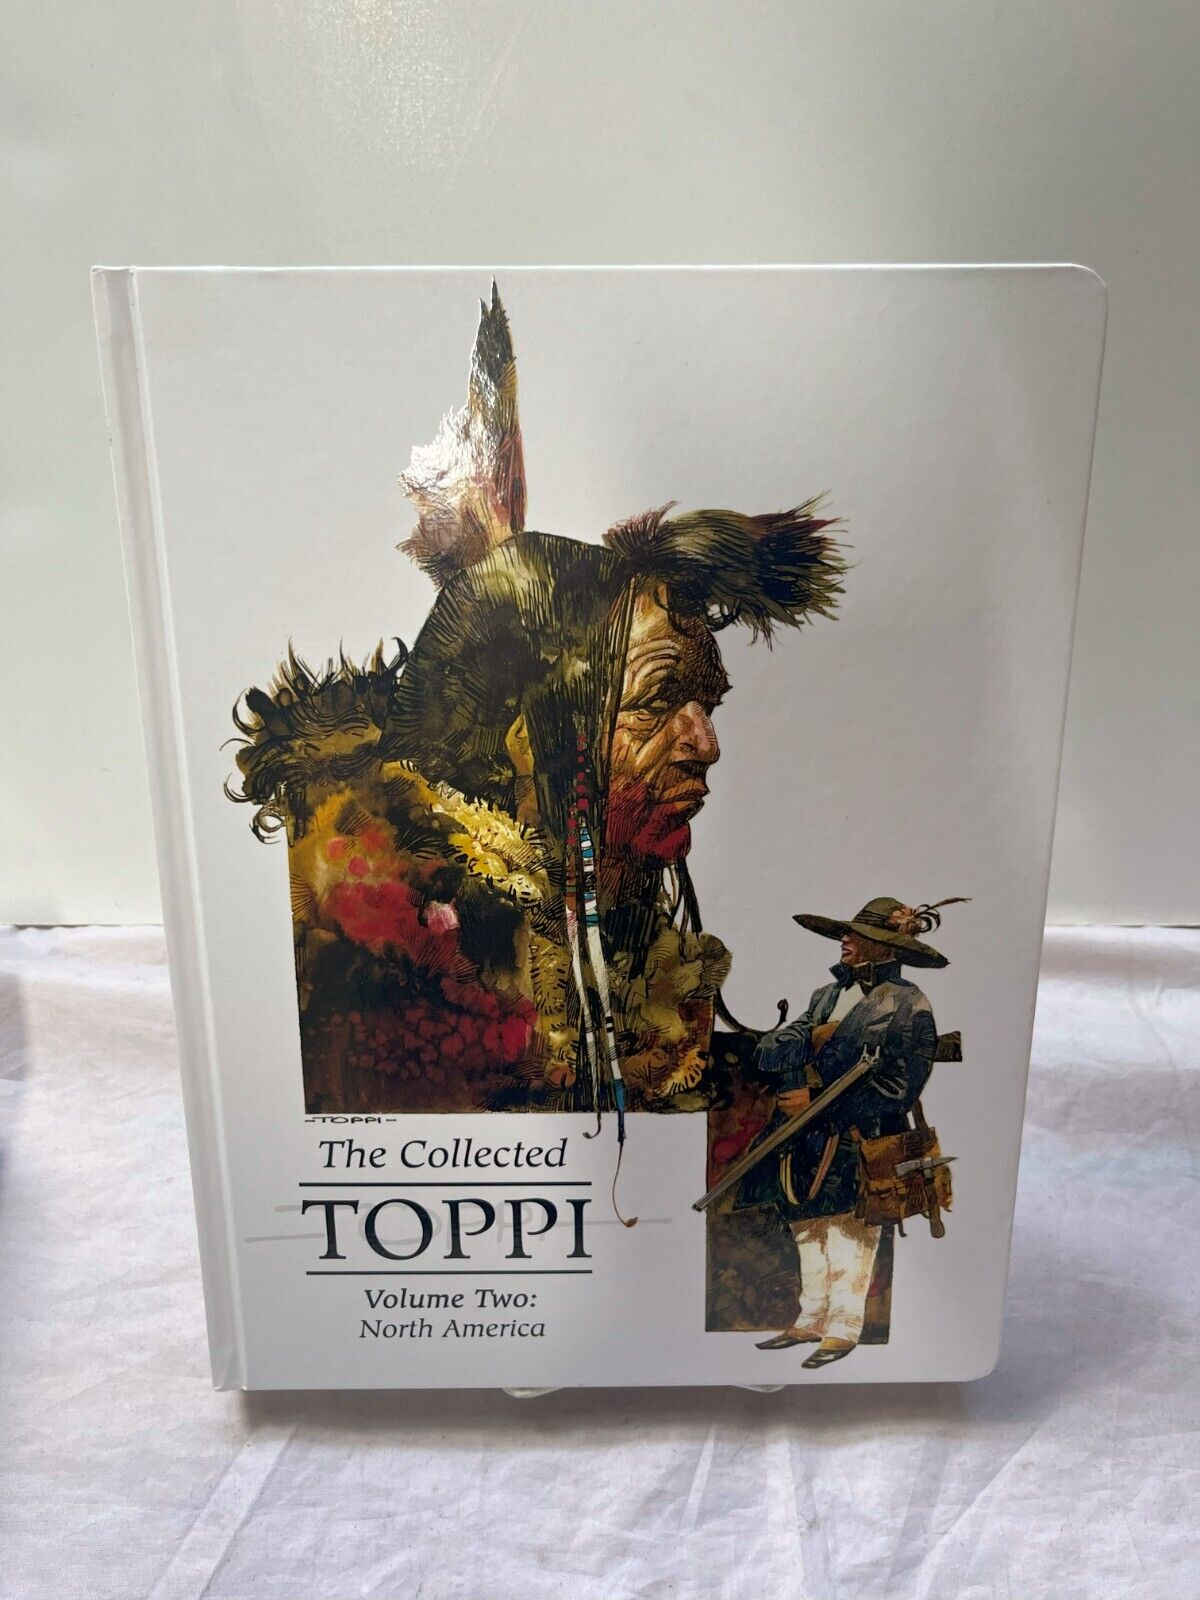 The Collected Toppi Volume 2: North America